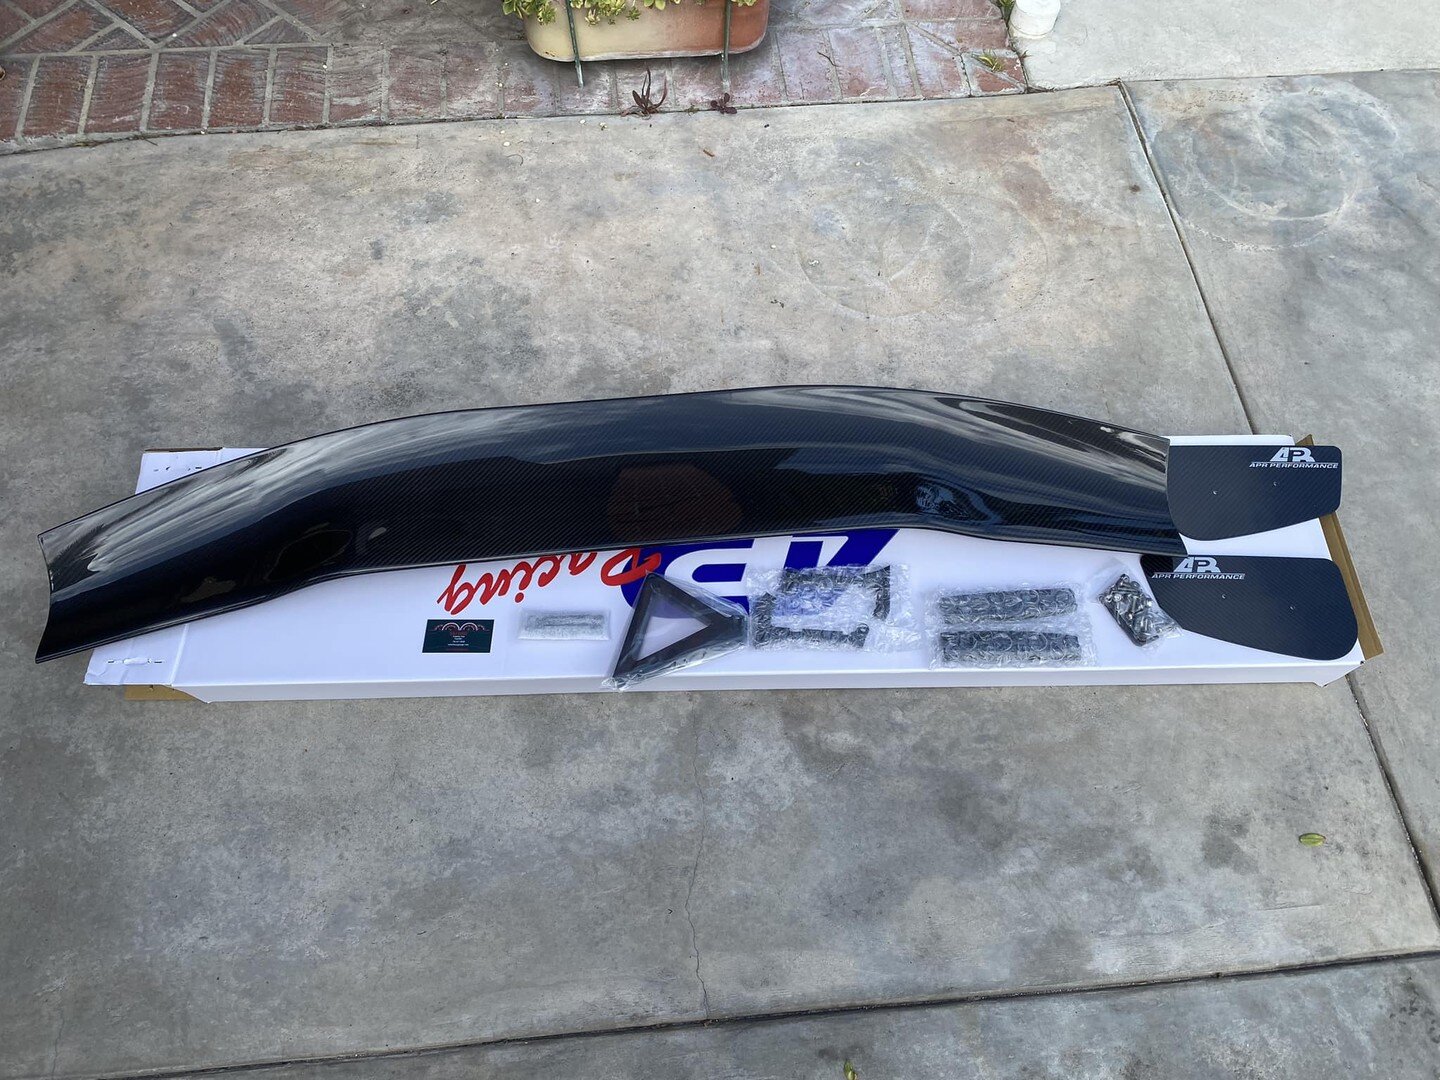 Customer taken care with APR Performance Carbon Fiber GTC200 Wing for 00-09 Honda S2000

🏎 Aftermarket Performance Parts
💰Financing available
📧 info@kenjigarage.com
📲 714-417-2698
🌎 Ship World Wide
💻 www.kenjigarage.com

#s2000 #hondas2000 #hon